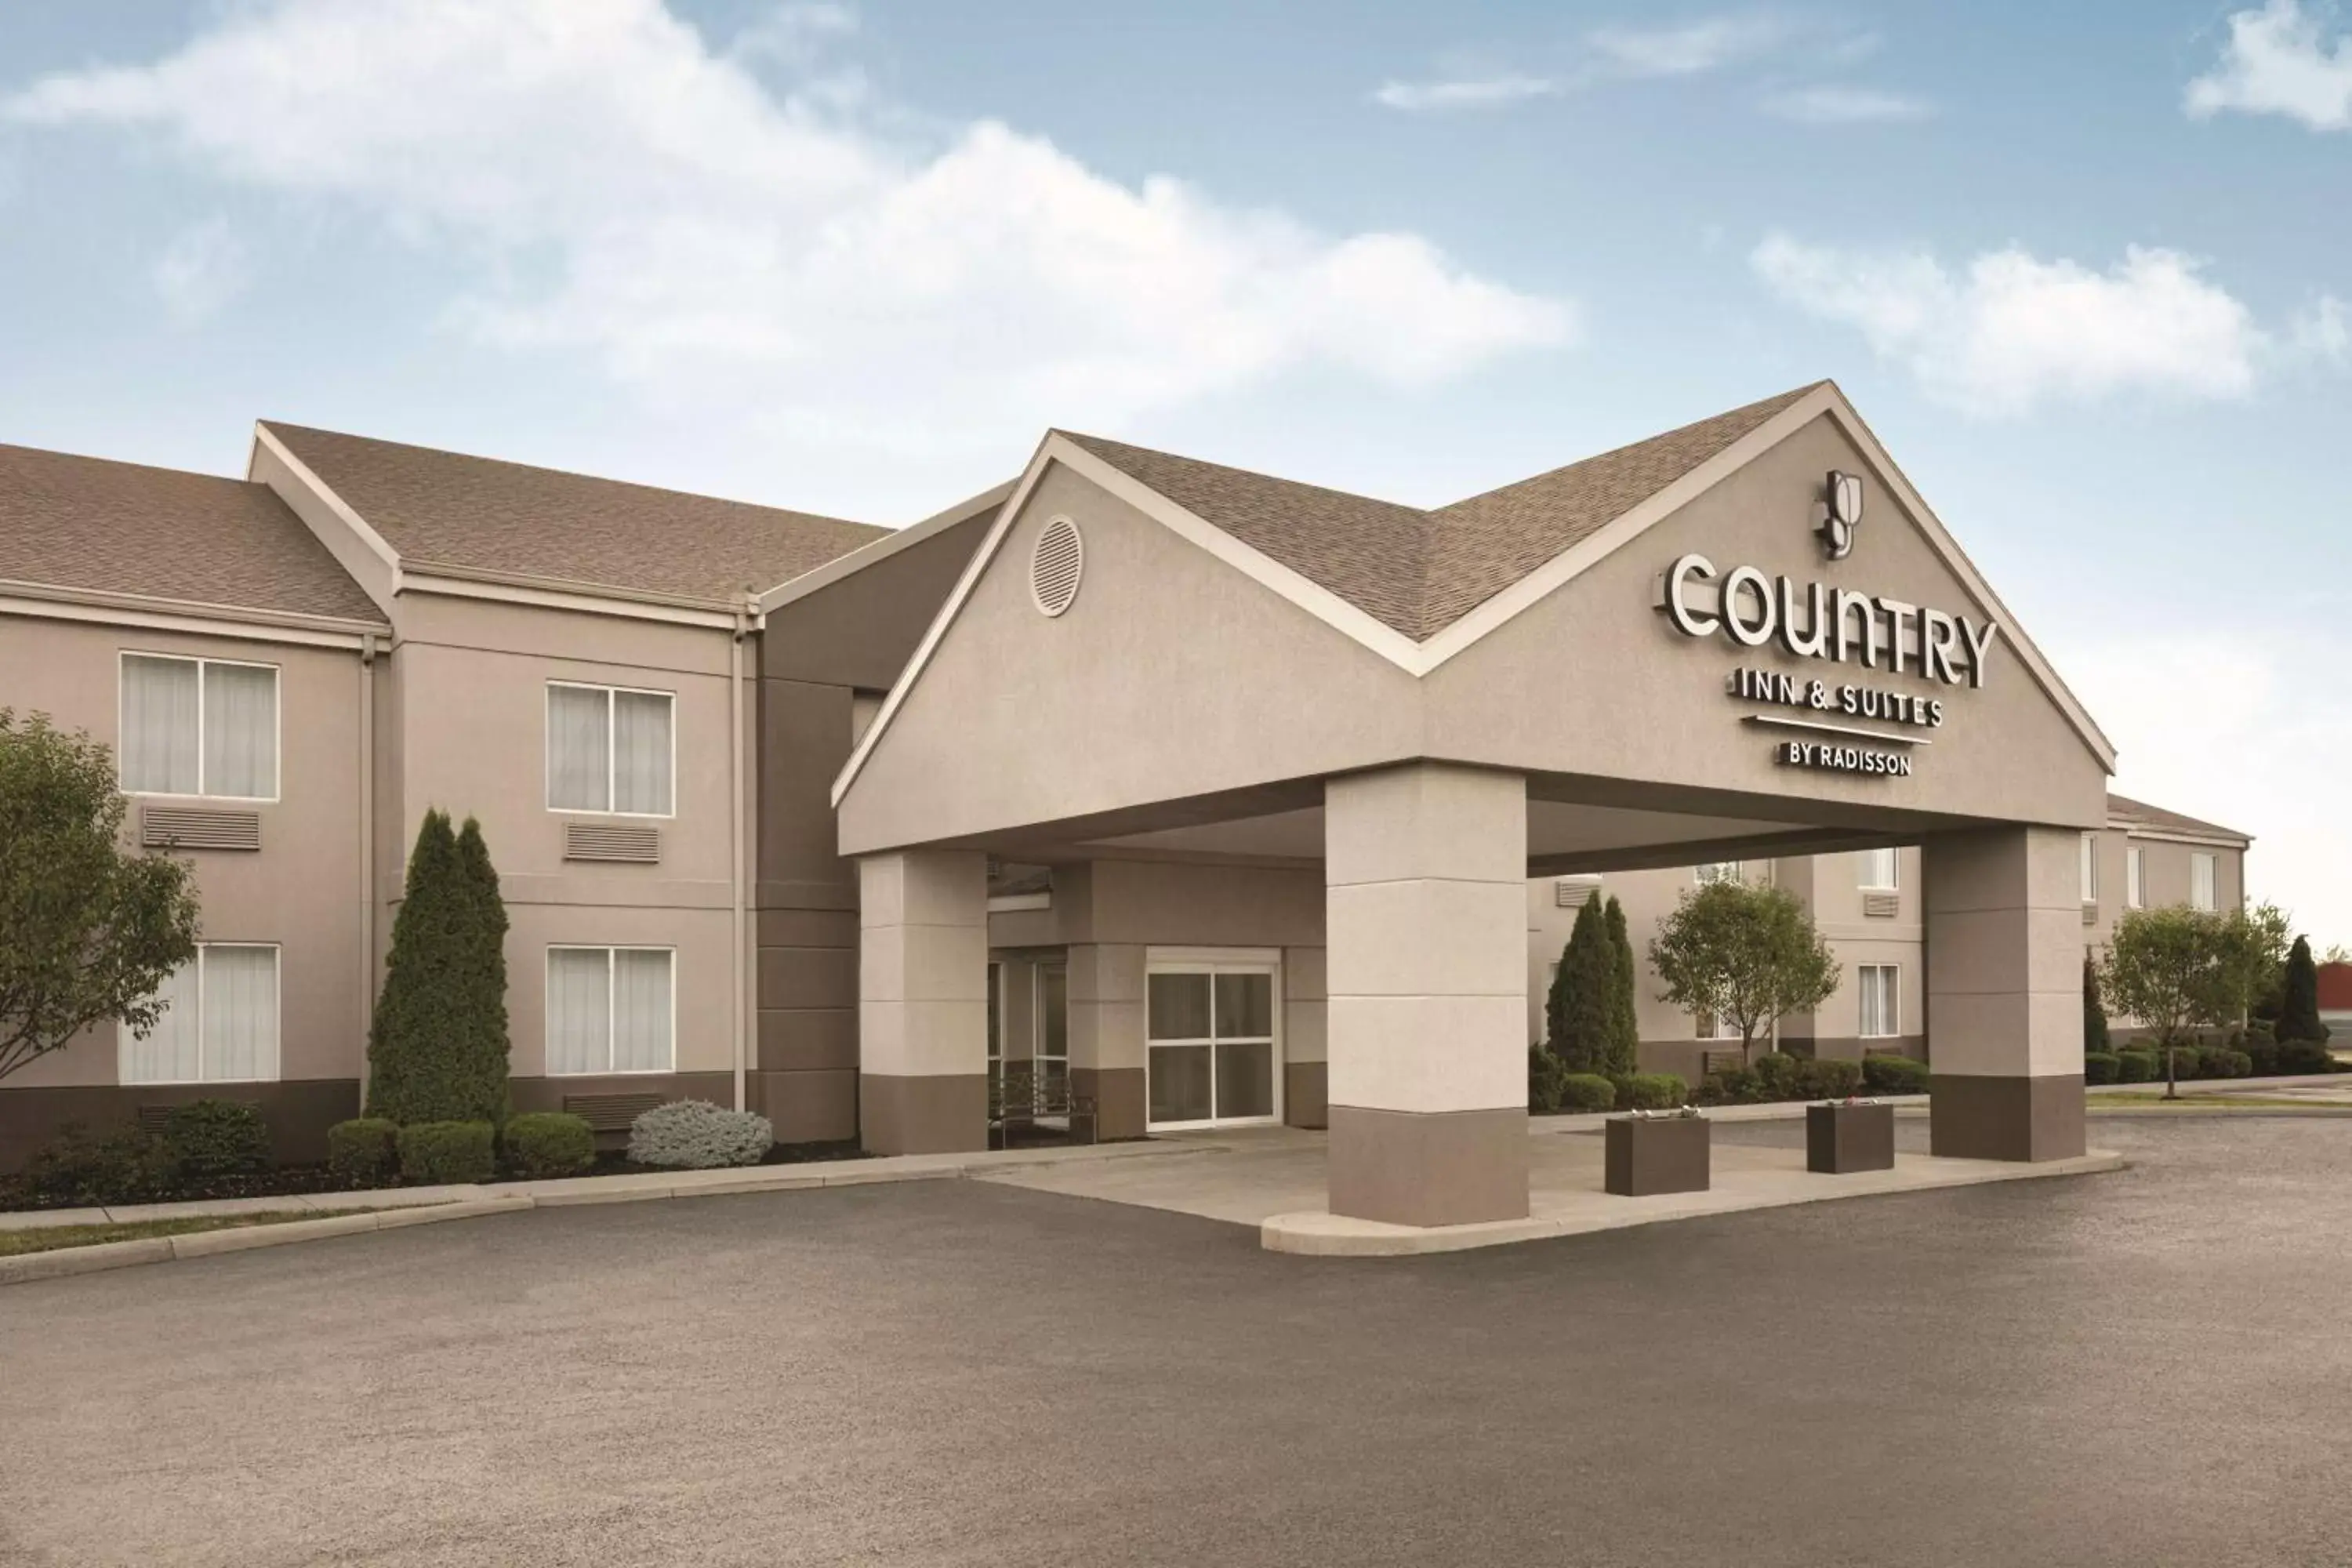 Property Building in Country Inn & Suites by Radisson, Port Clinton, OH